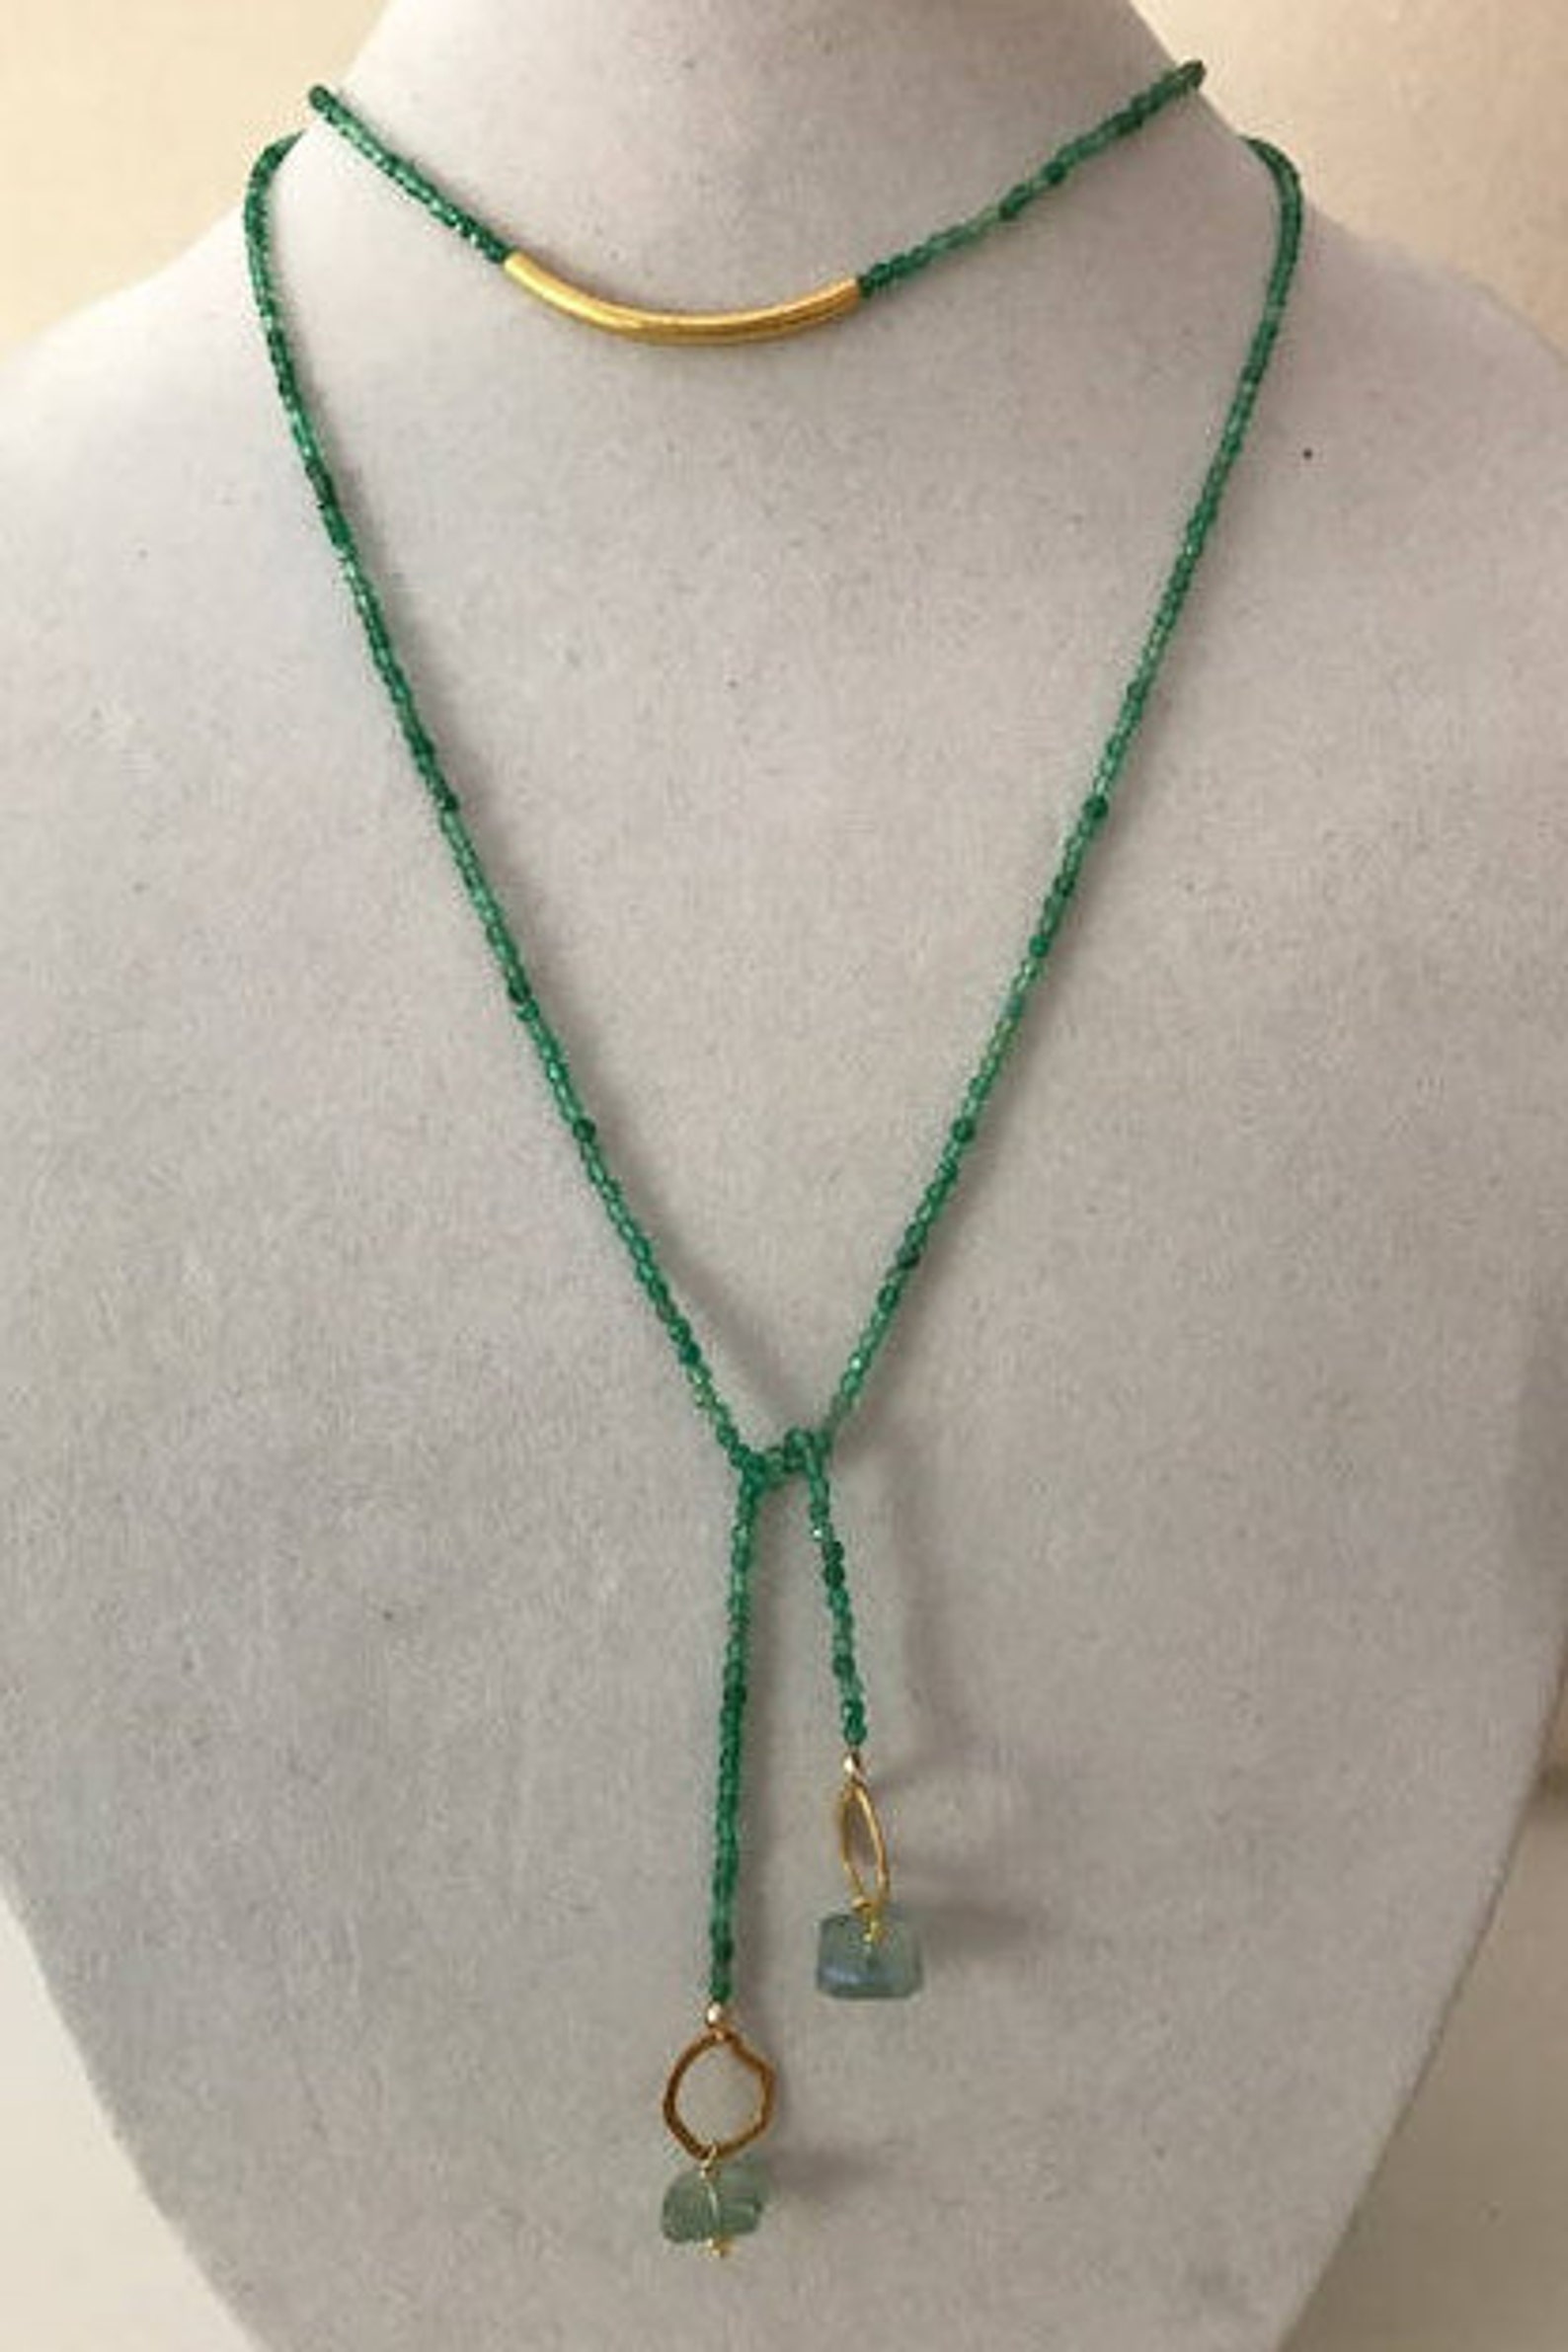 Choker Long Wrap Beaded Gold Tube GreenNecklace | Etsy